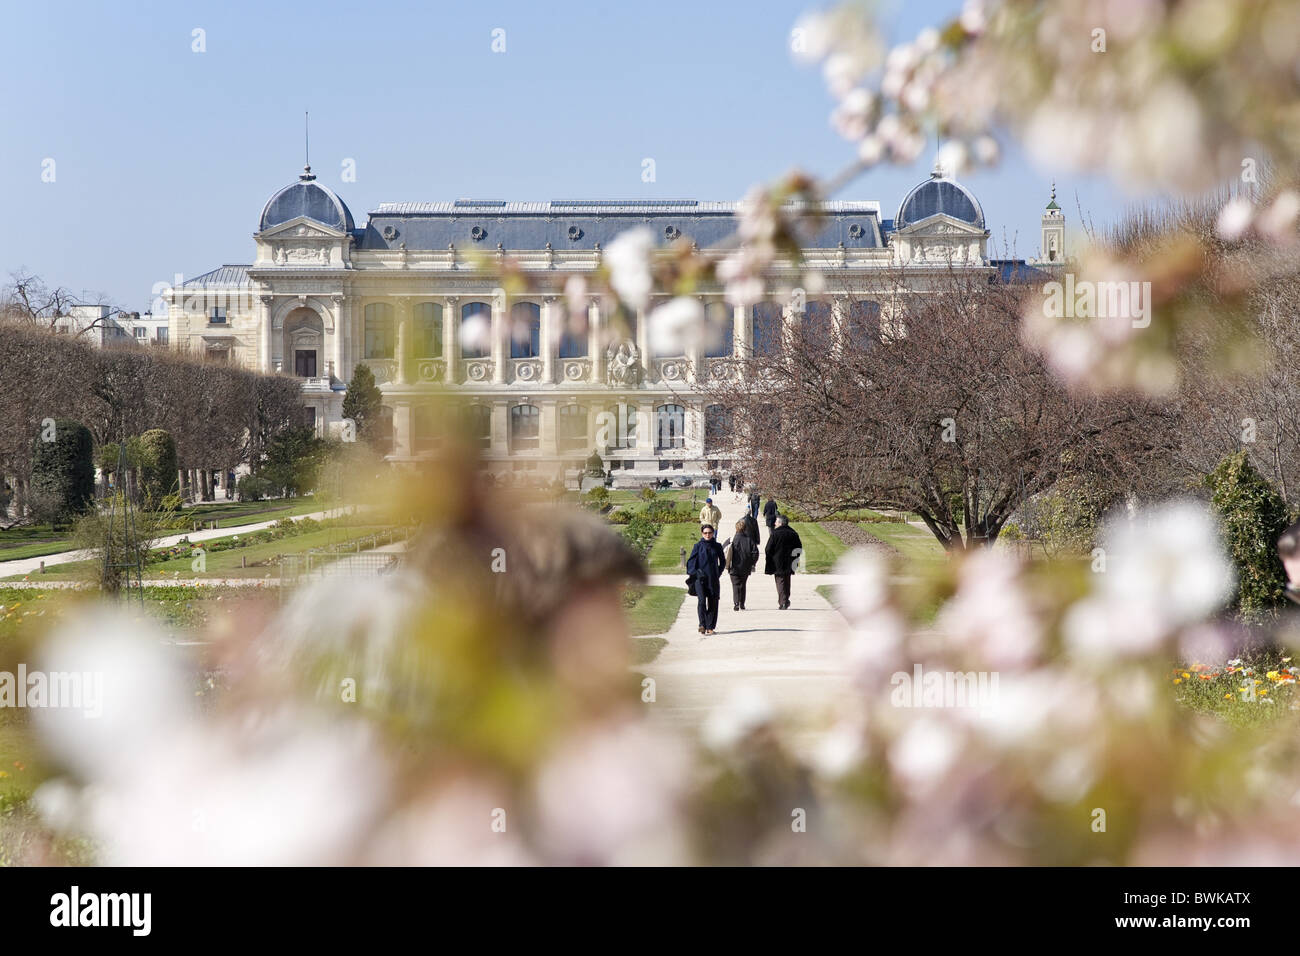 Cherry blossom in the park around the natural history museum Musée national d’histoire naturelle, Paris, France, Europe Stock Photo